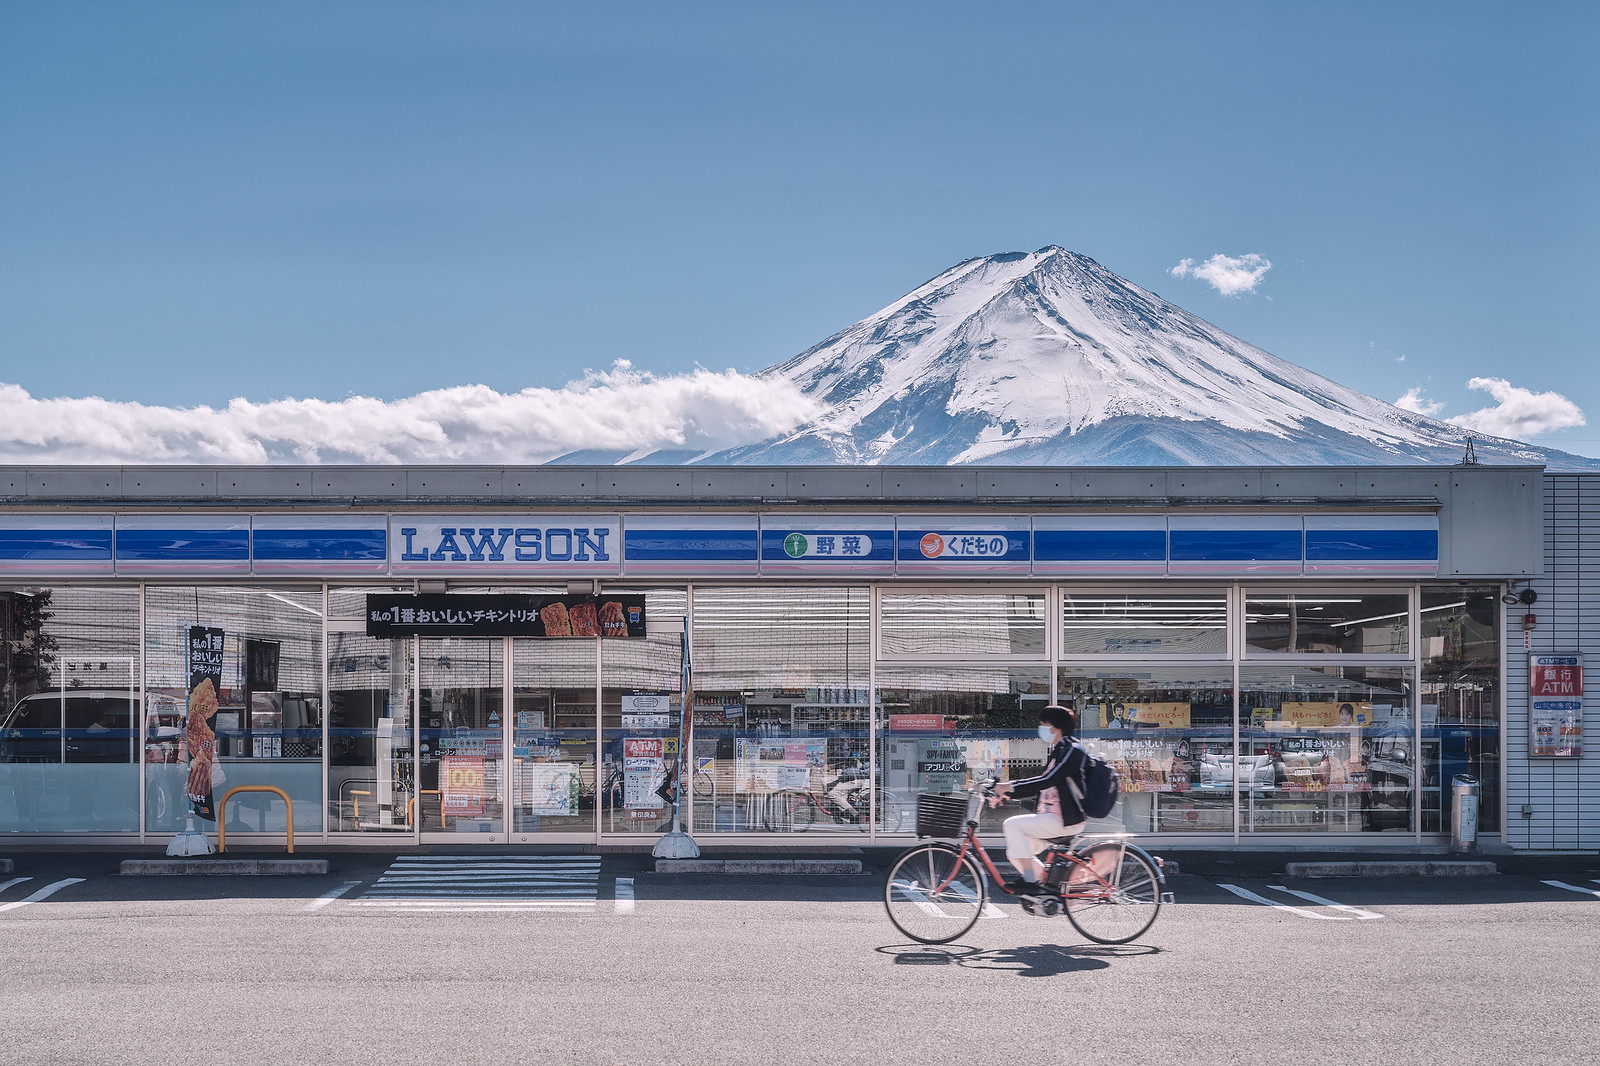 General 1600x1066 photography Mount Fuji Lawson mountains snow snowy mountain snowy peak bicycle store front Japanese parking lot clouds mask backpacks sunlight sky Japan